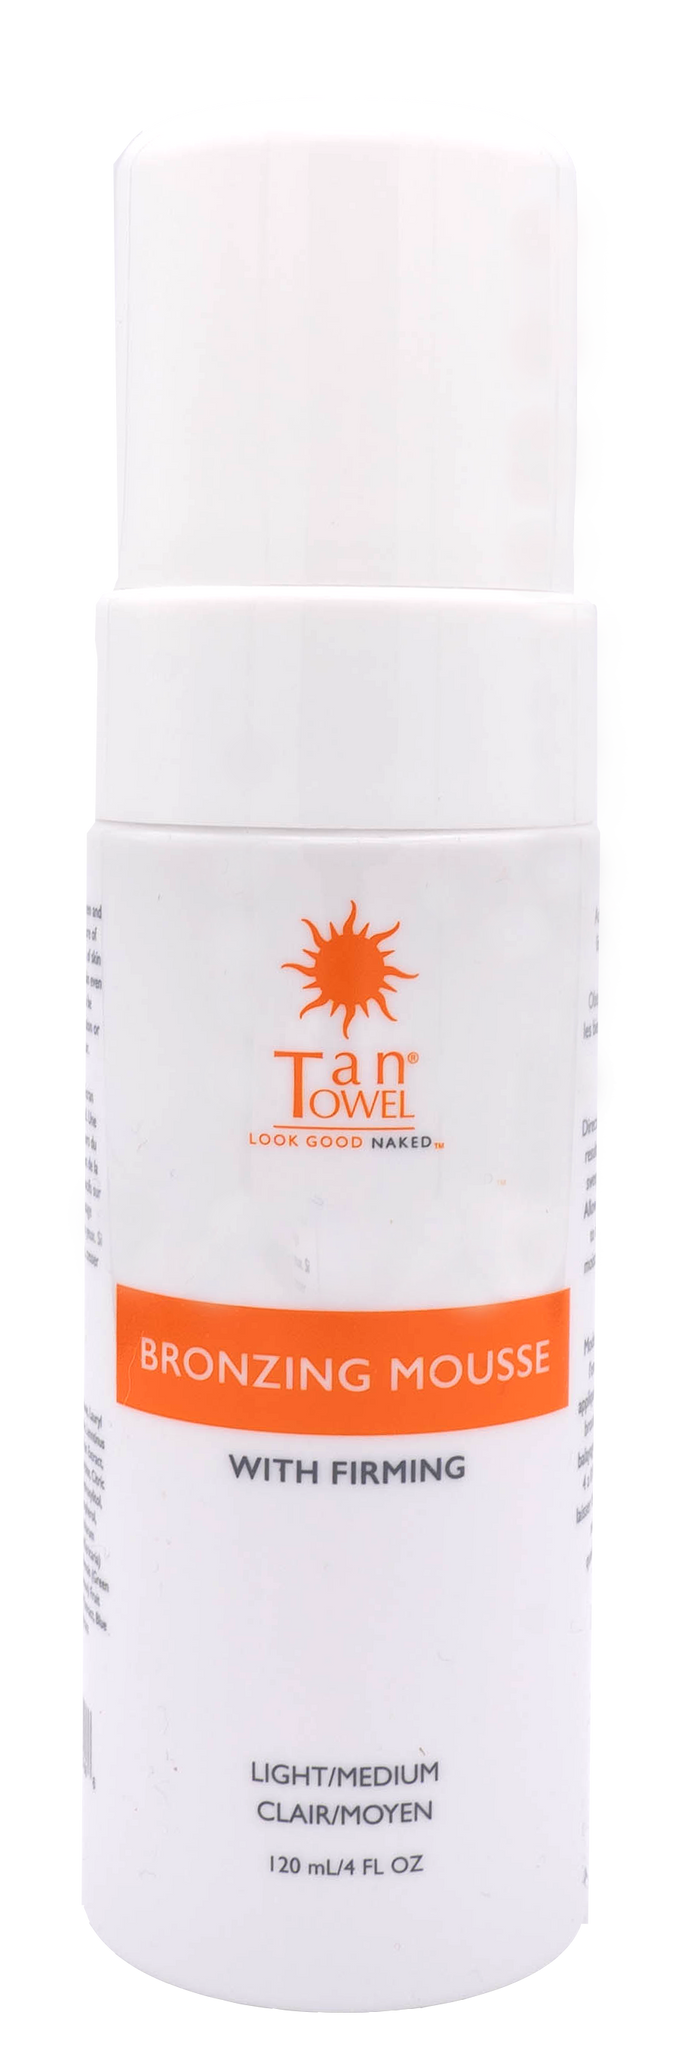 Bronzing Mousse With Firming - Self Tanning | TanTowel USA